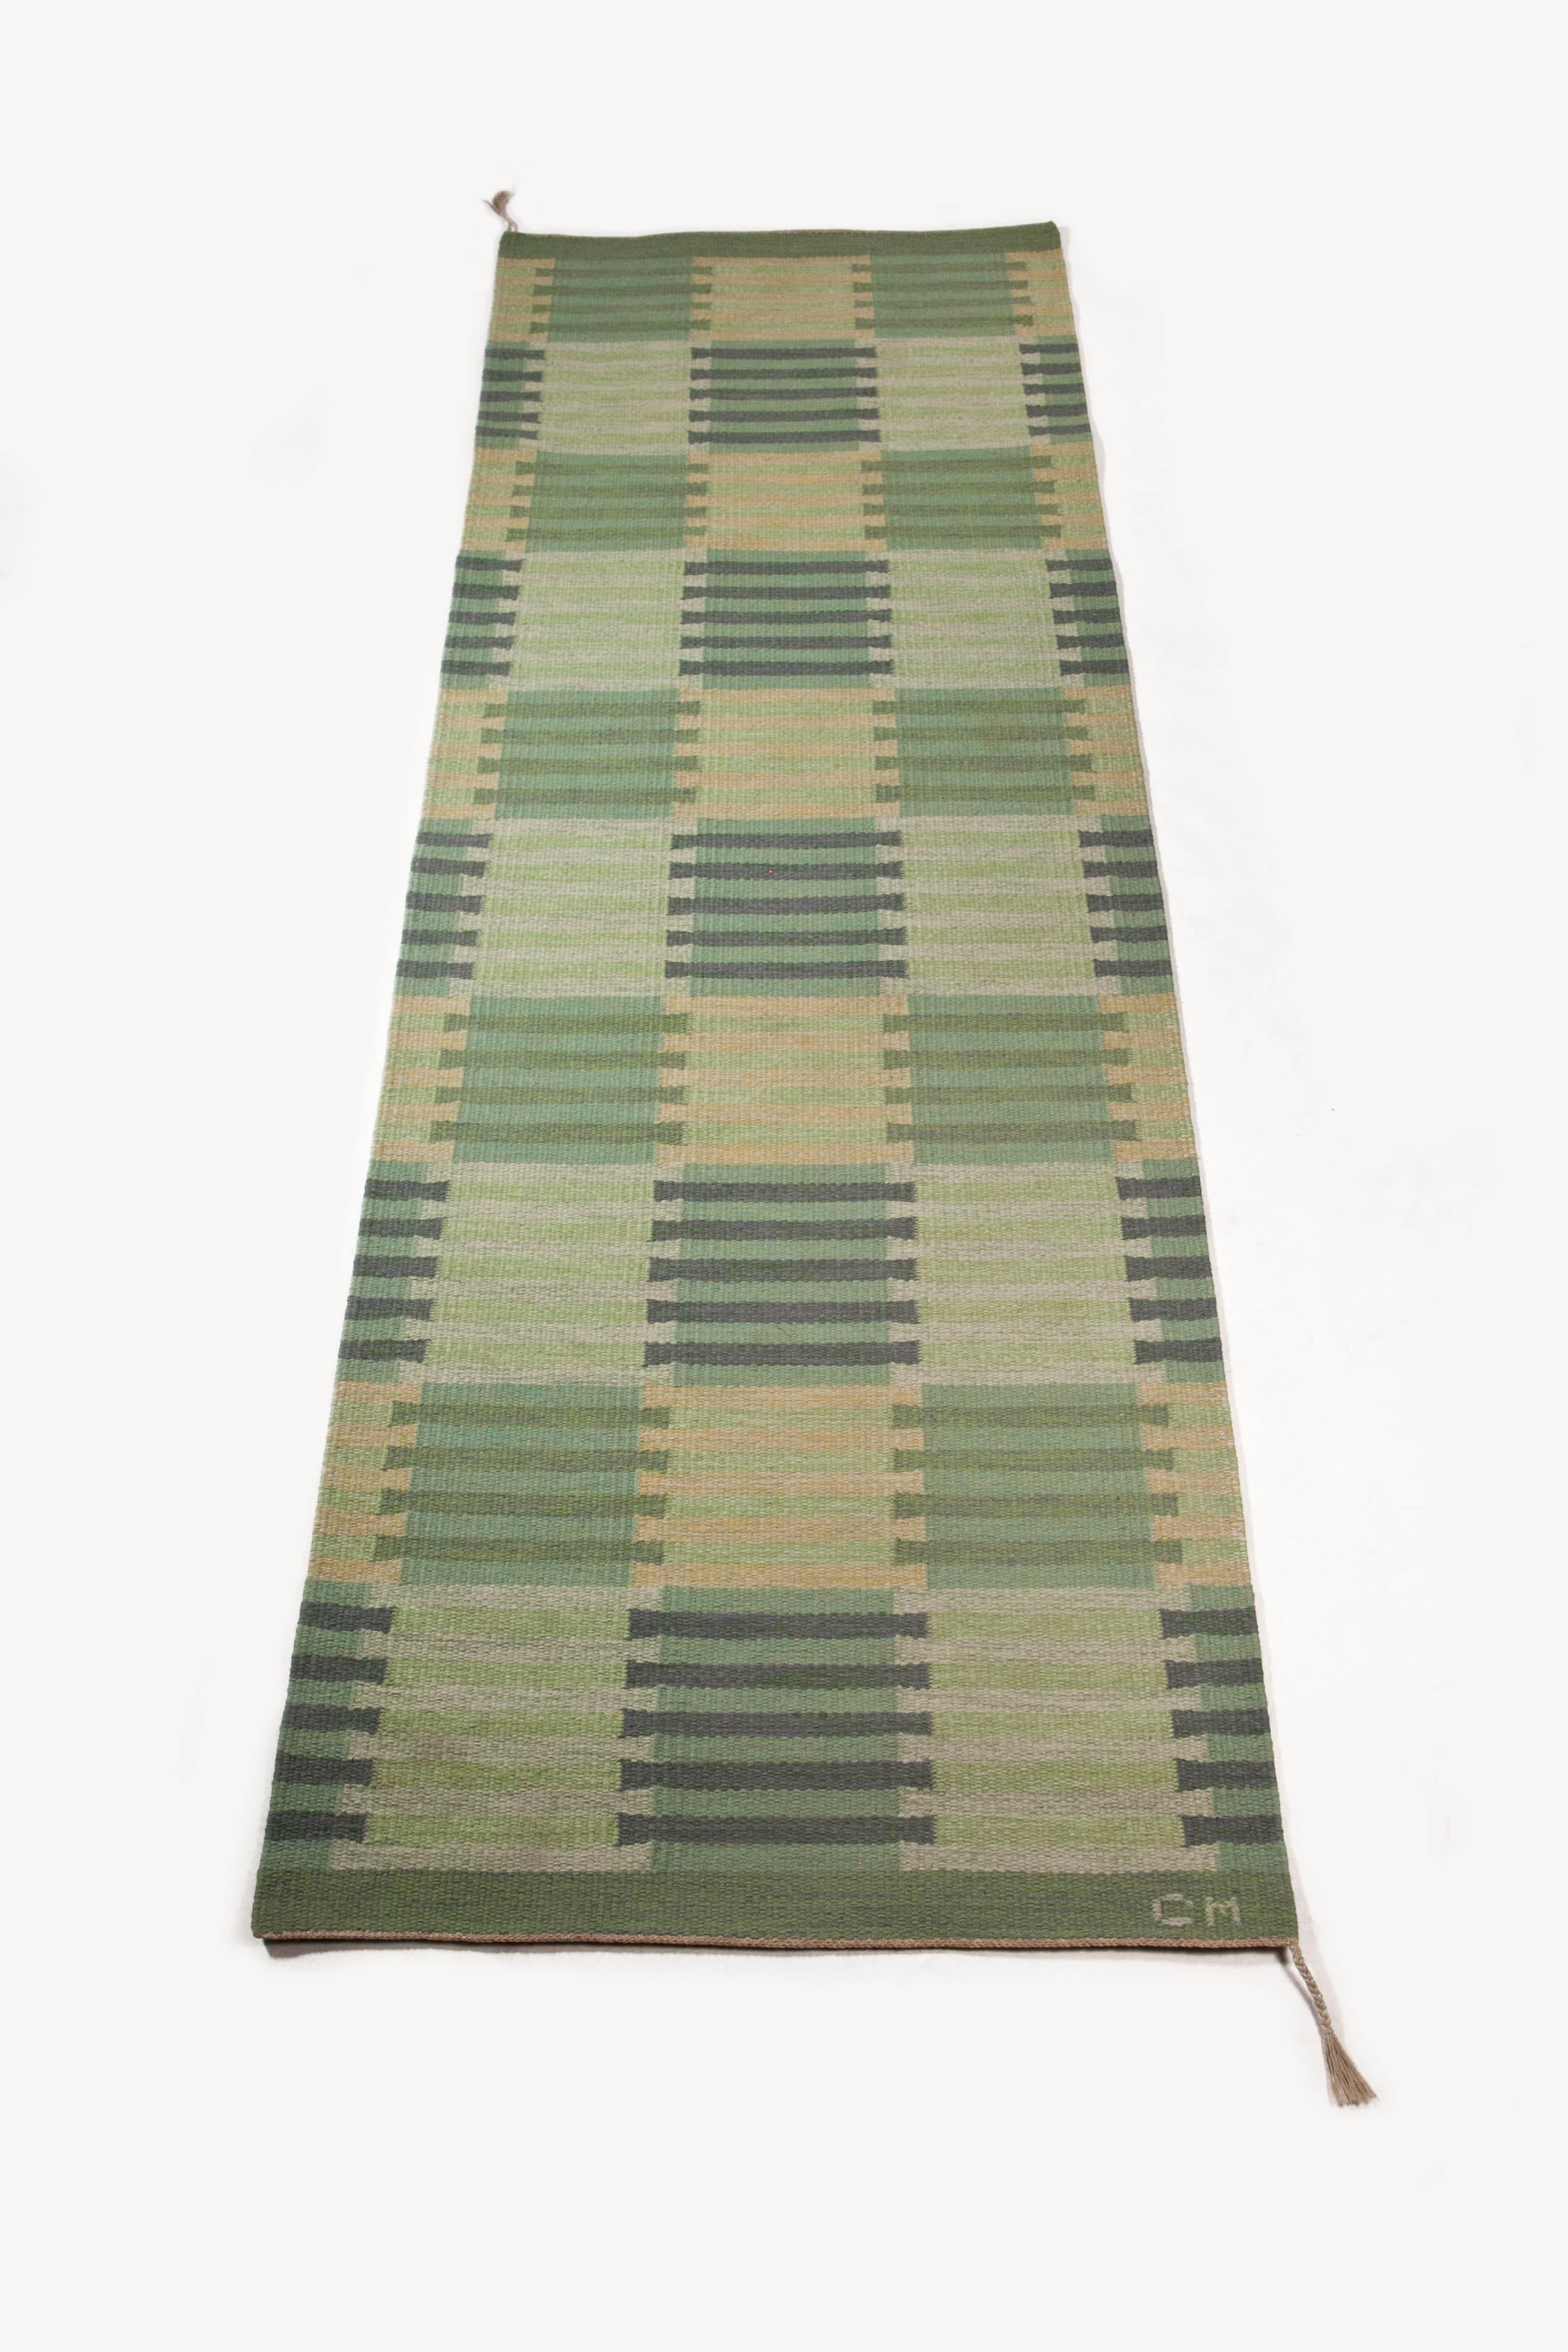 Carl Malmsten Swedish Flat Weave rug “Capellagården” Runner - Sweden 1960's

Excellent runner made by Carl Malmsten. Named after the place of study of Carl Malmsten.

Measures: 119.2